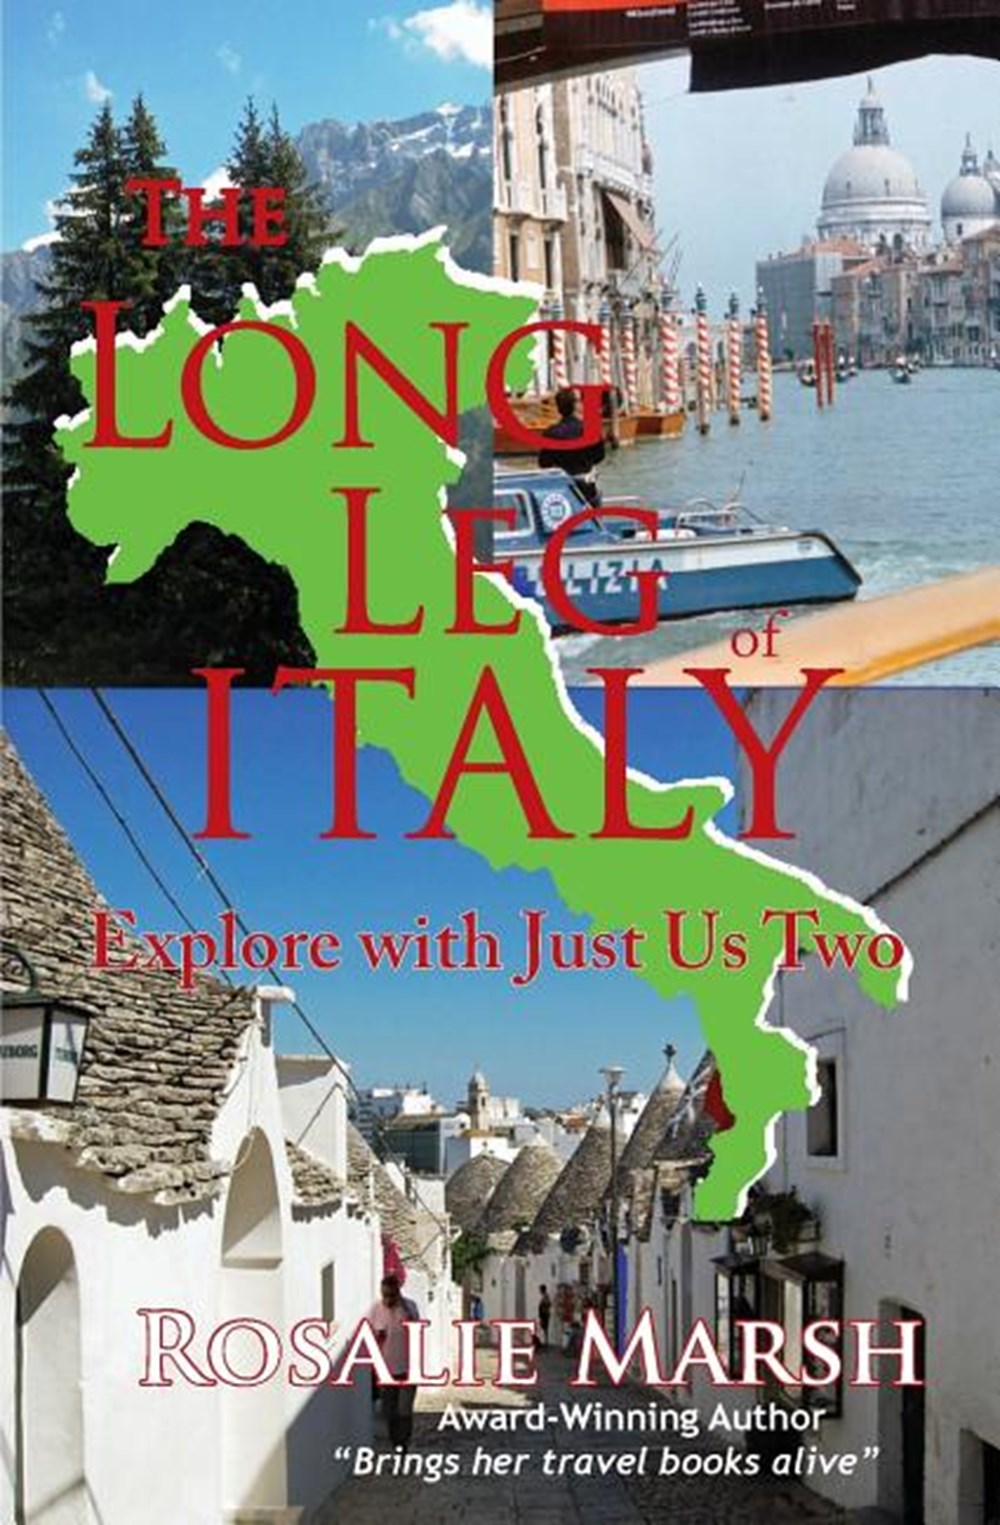 Long Leg of Italy: Explore with Just Us Two